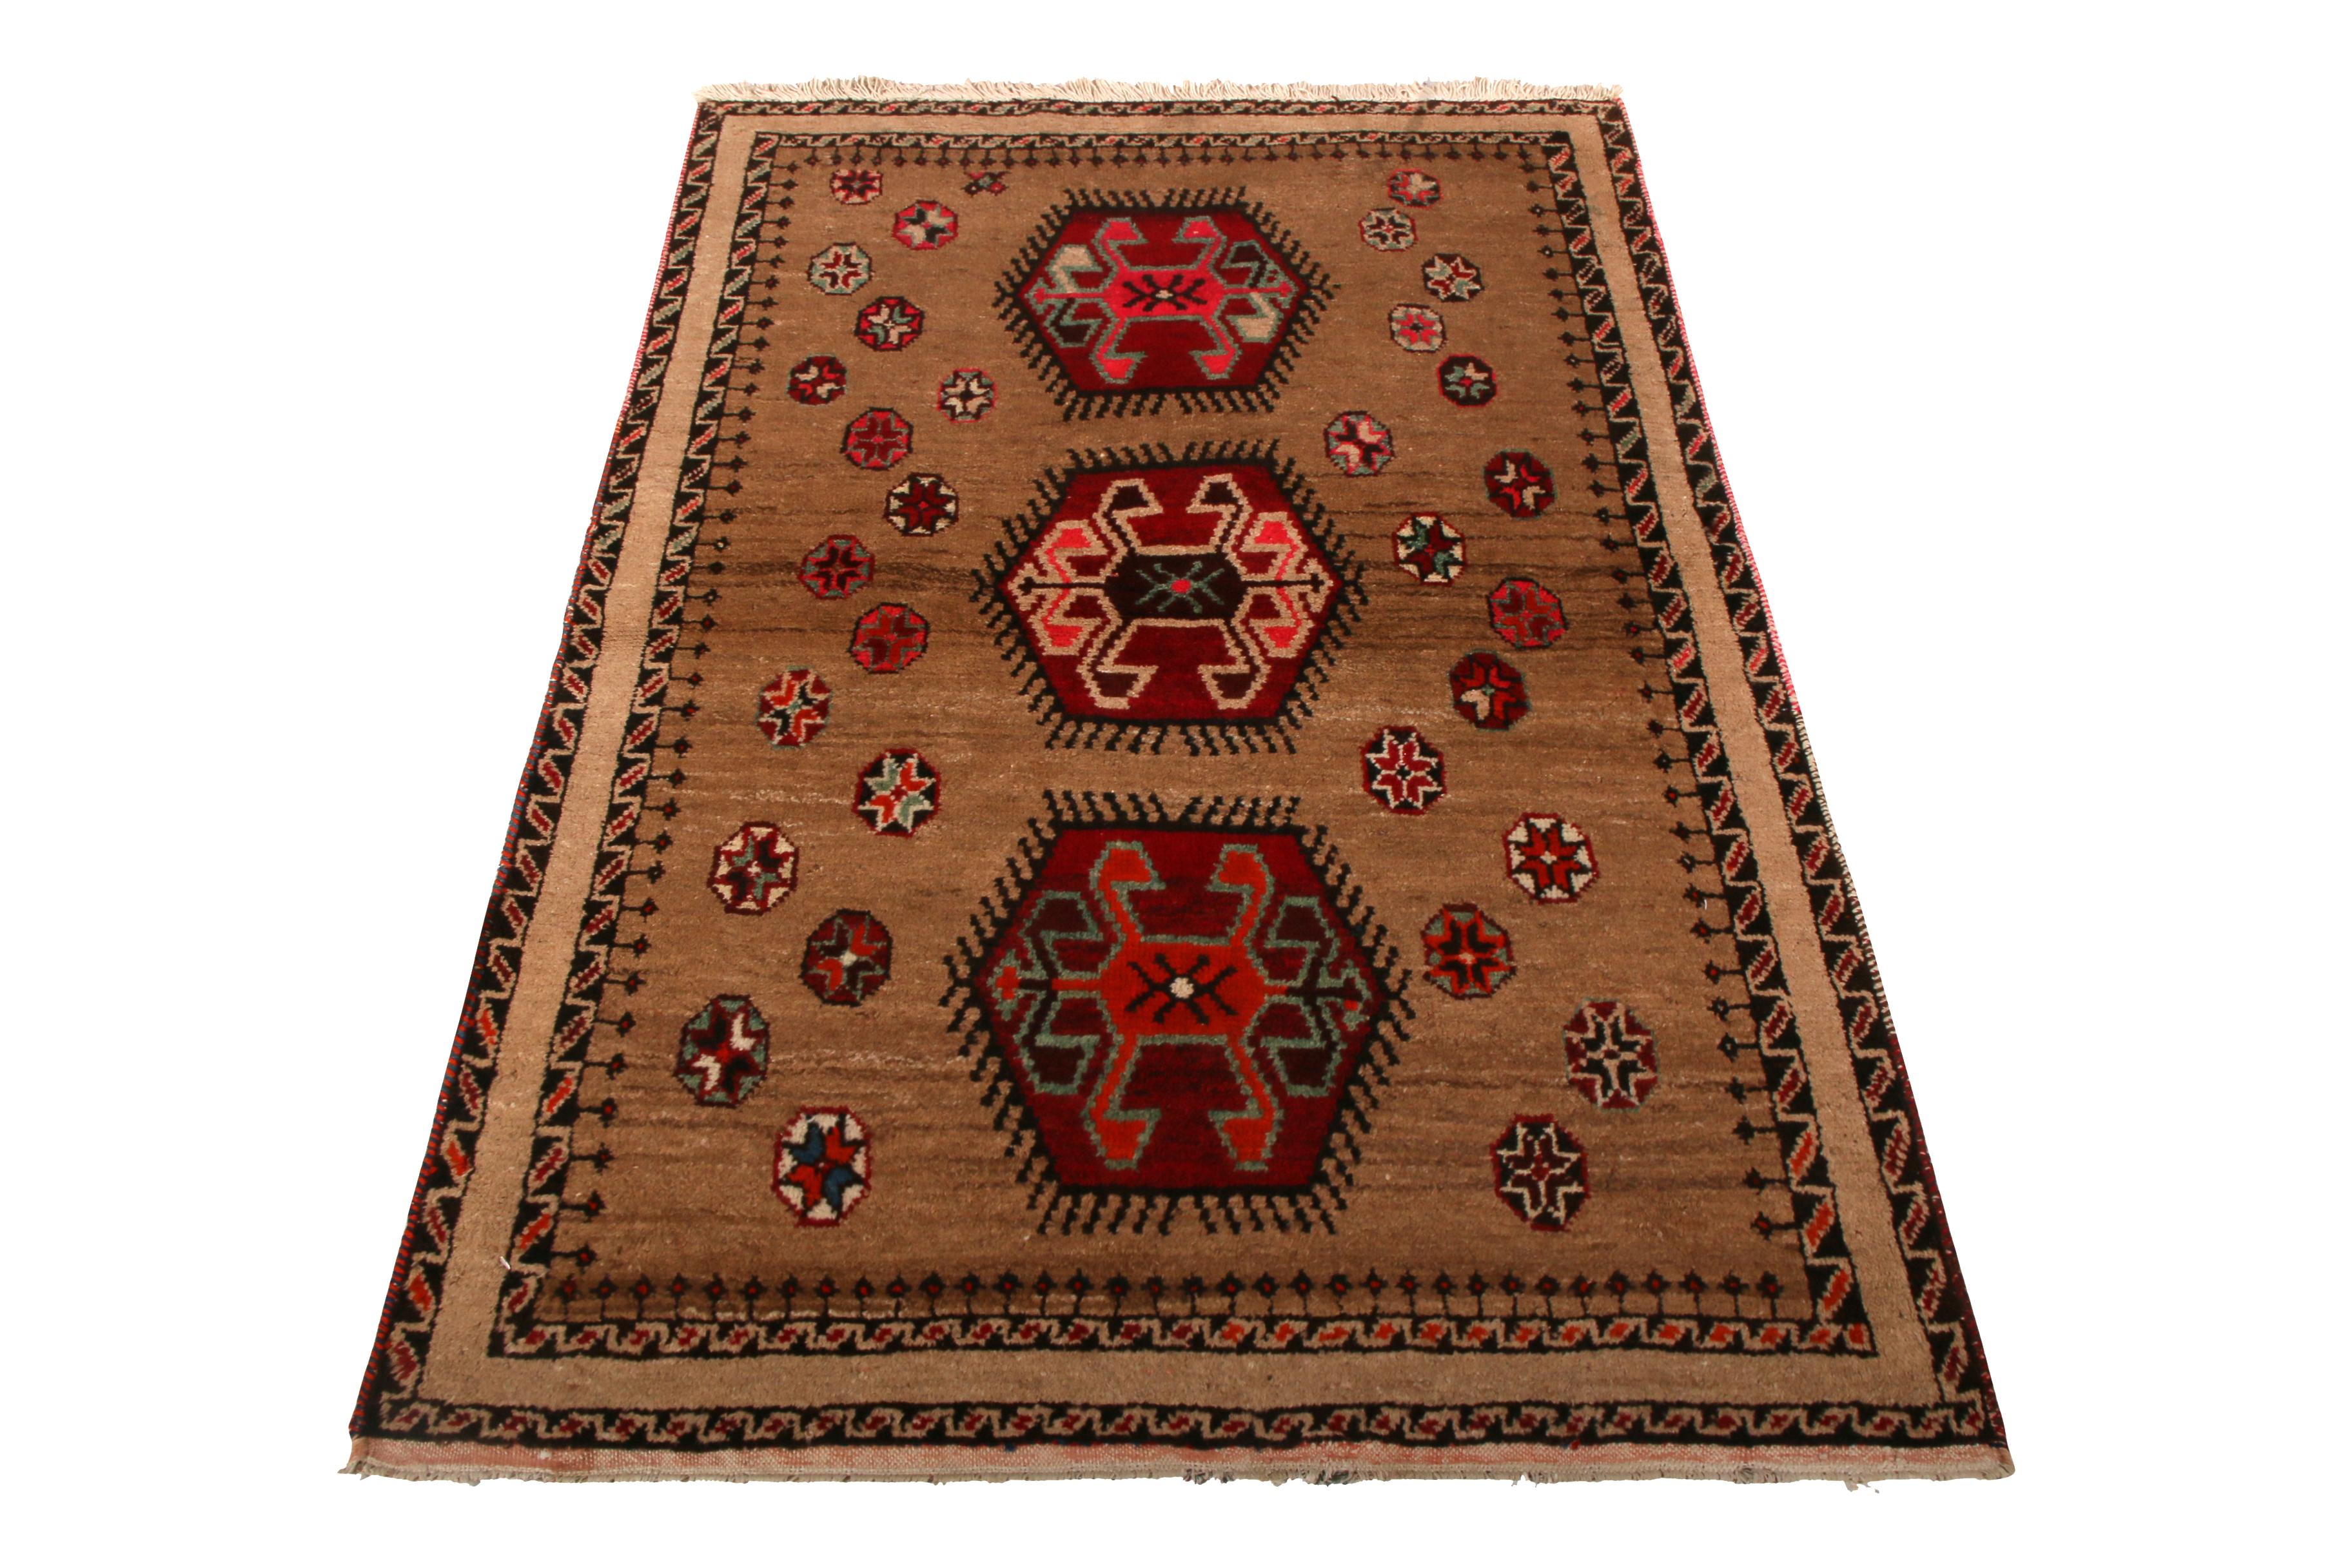 Made in hand knotted wool originating between 1950-1960, this vintage midcentury Gabbeh Persian rug enjoys a rich transitional take on Classic tribal elements in a versatile size. The juxtaposition of the symmetry and whimsy in the medallions